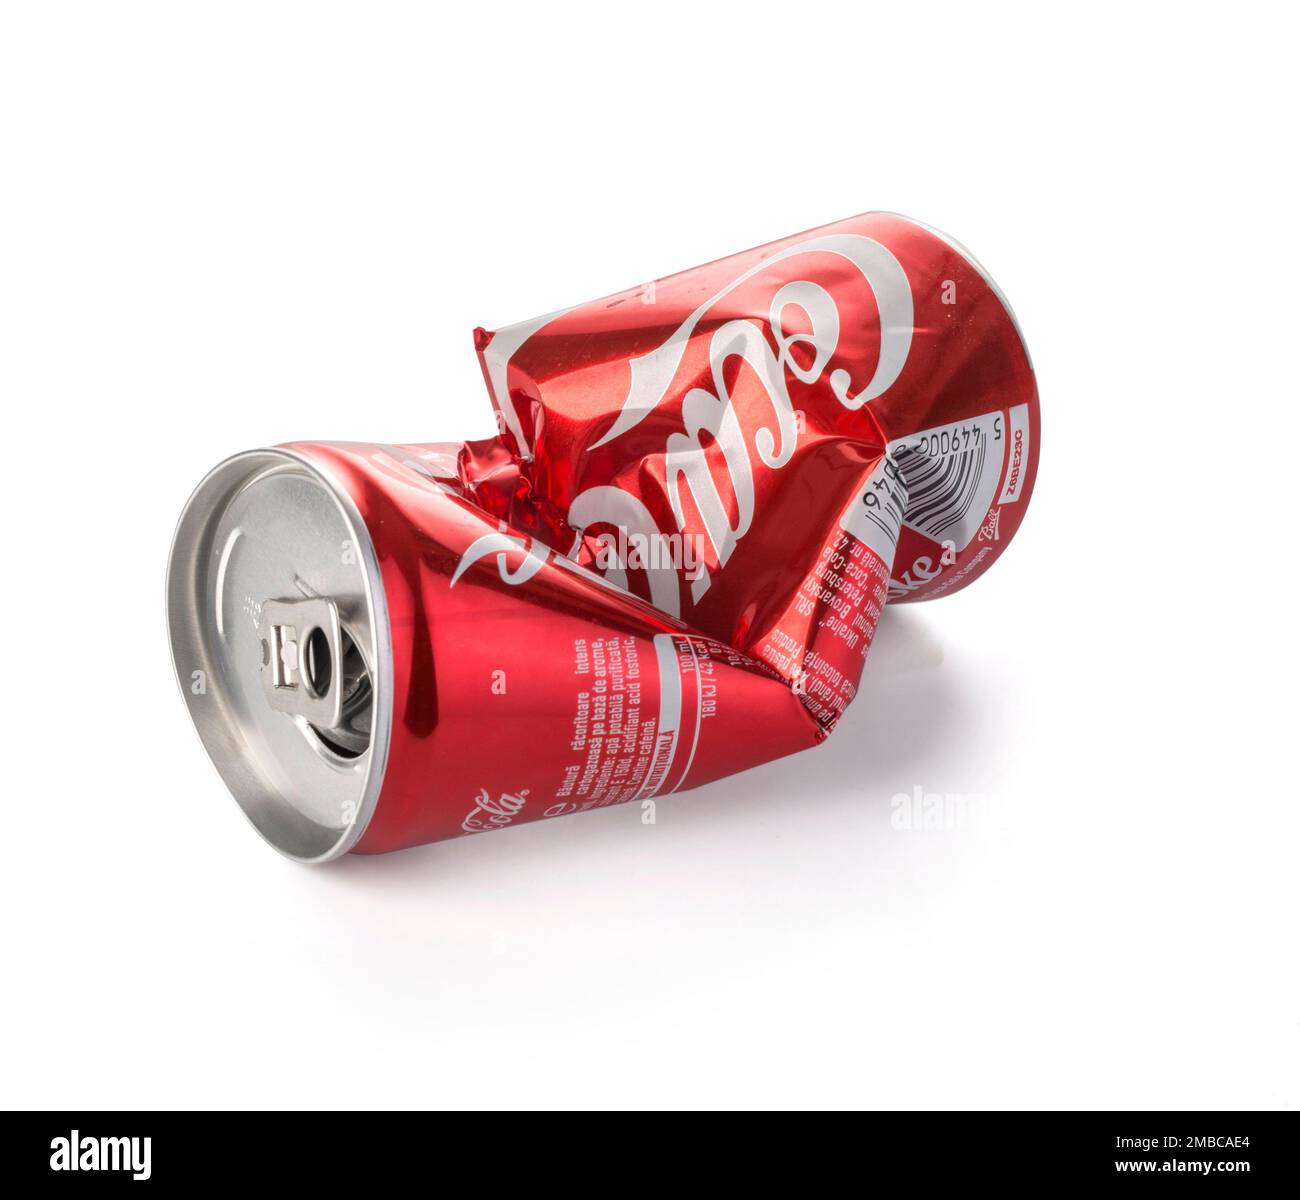 Chisinau, Moldova August 26, 2016: An Empty Dented and Crushed Can of Coca-Cola on a white background Stock Photo